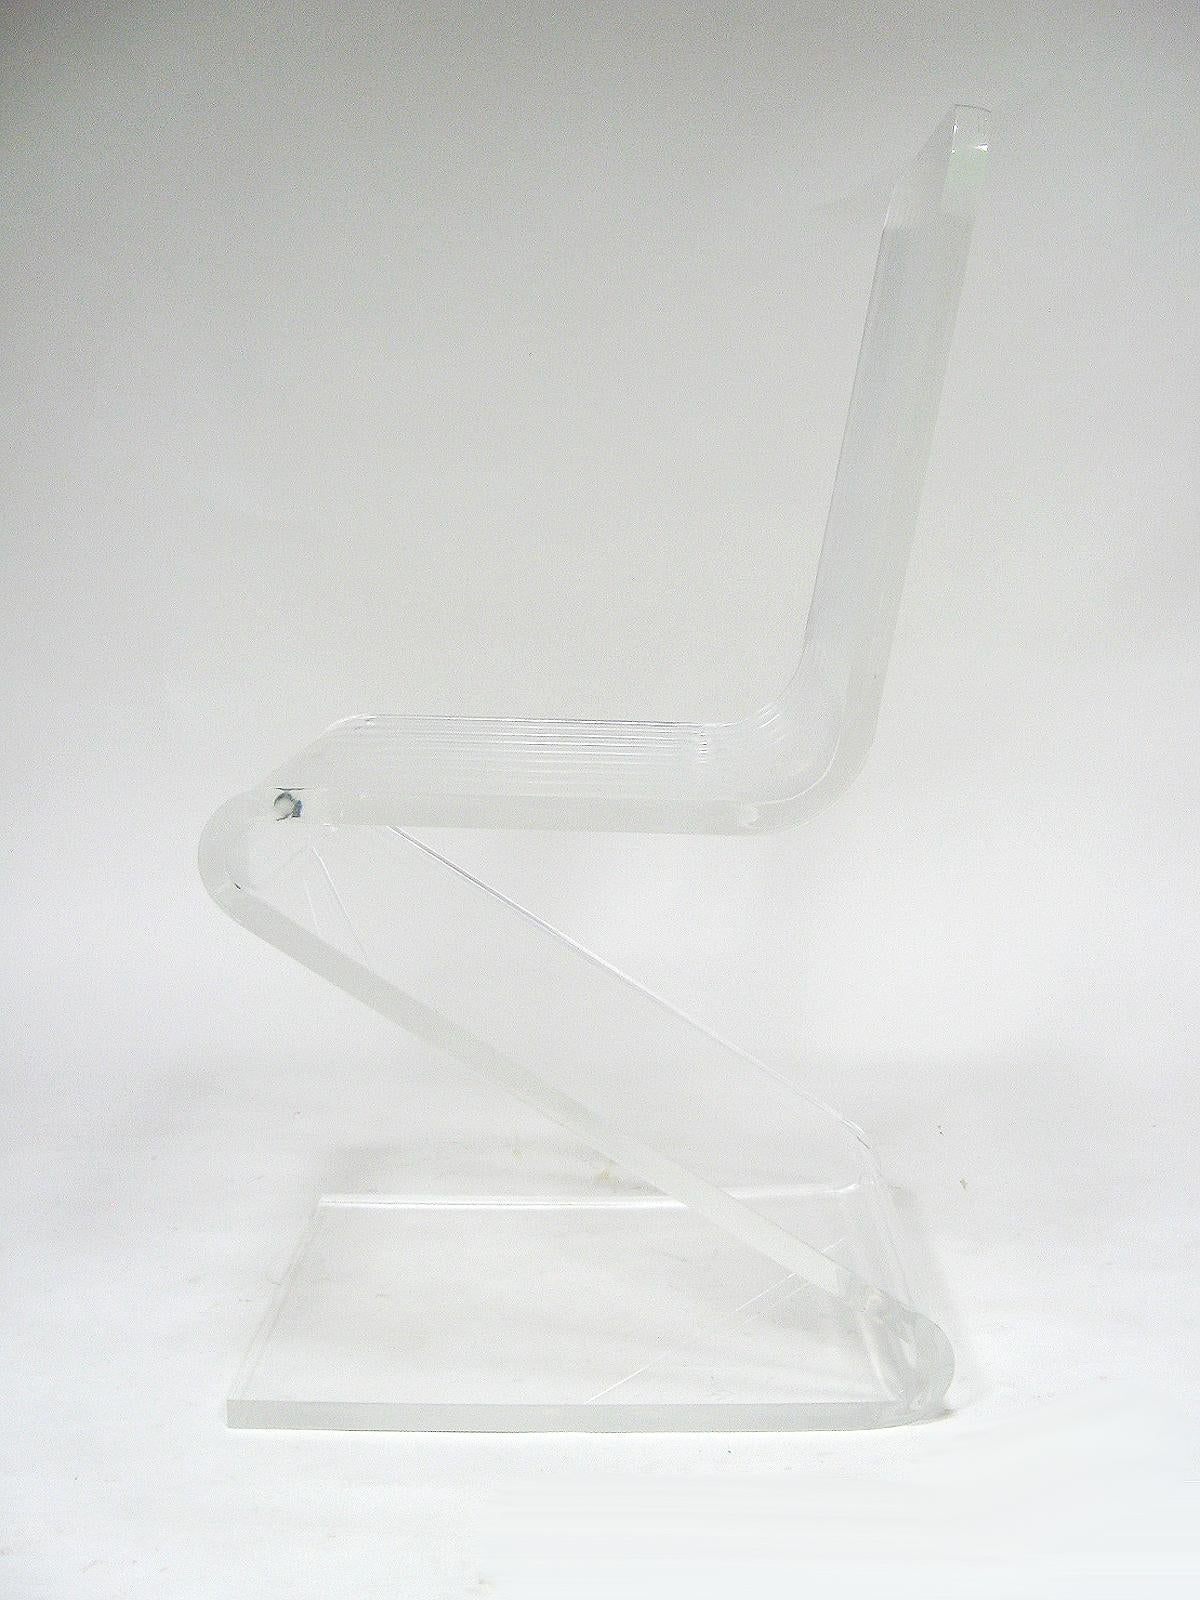 This classic lucite Z chair is a great occasional piece in very good original condition. The transparent quality and minimal form allow it to work in any interior.